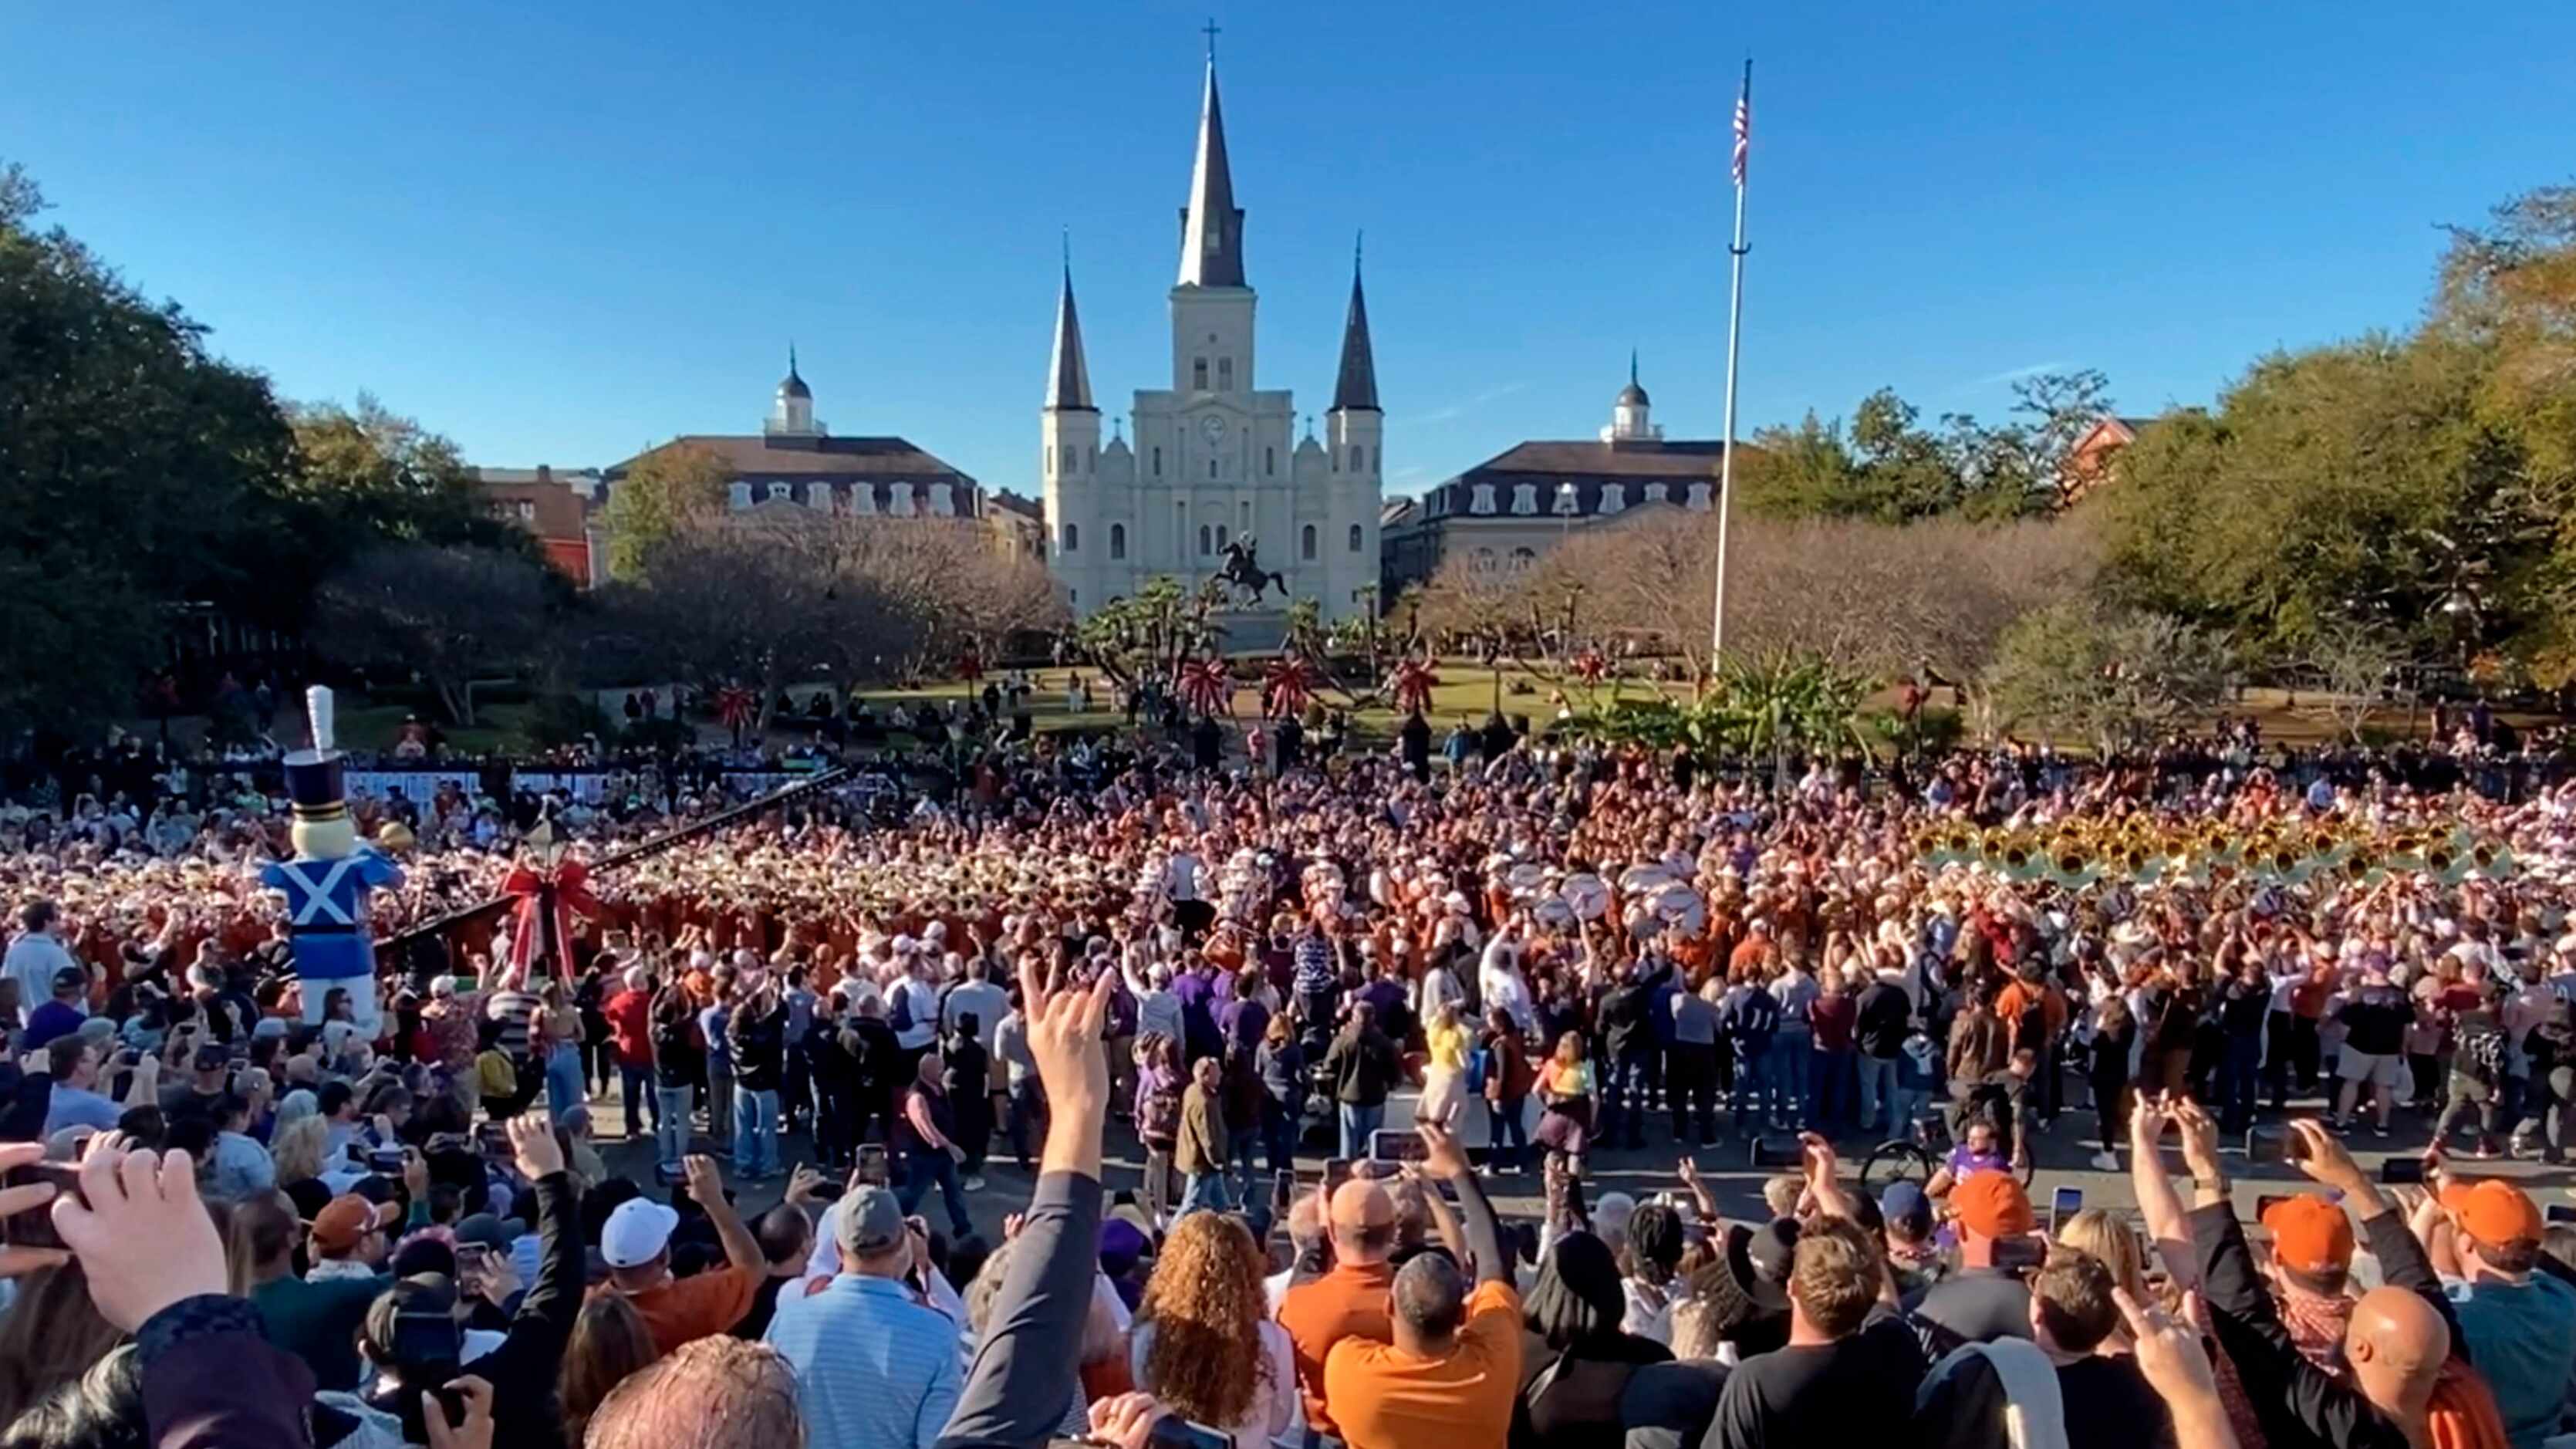 University of Texas Longhorn Band plays the Texas Fight song in Jackson Square as they...